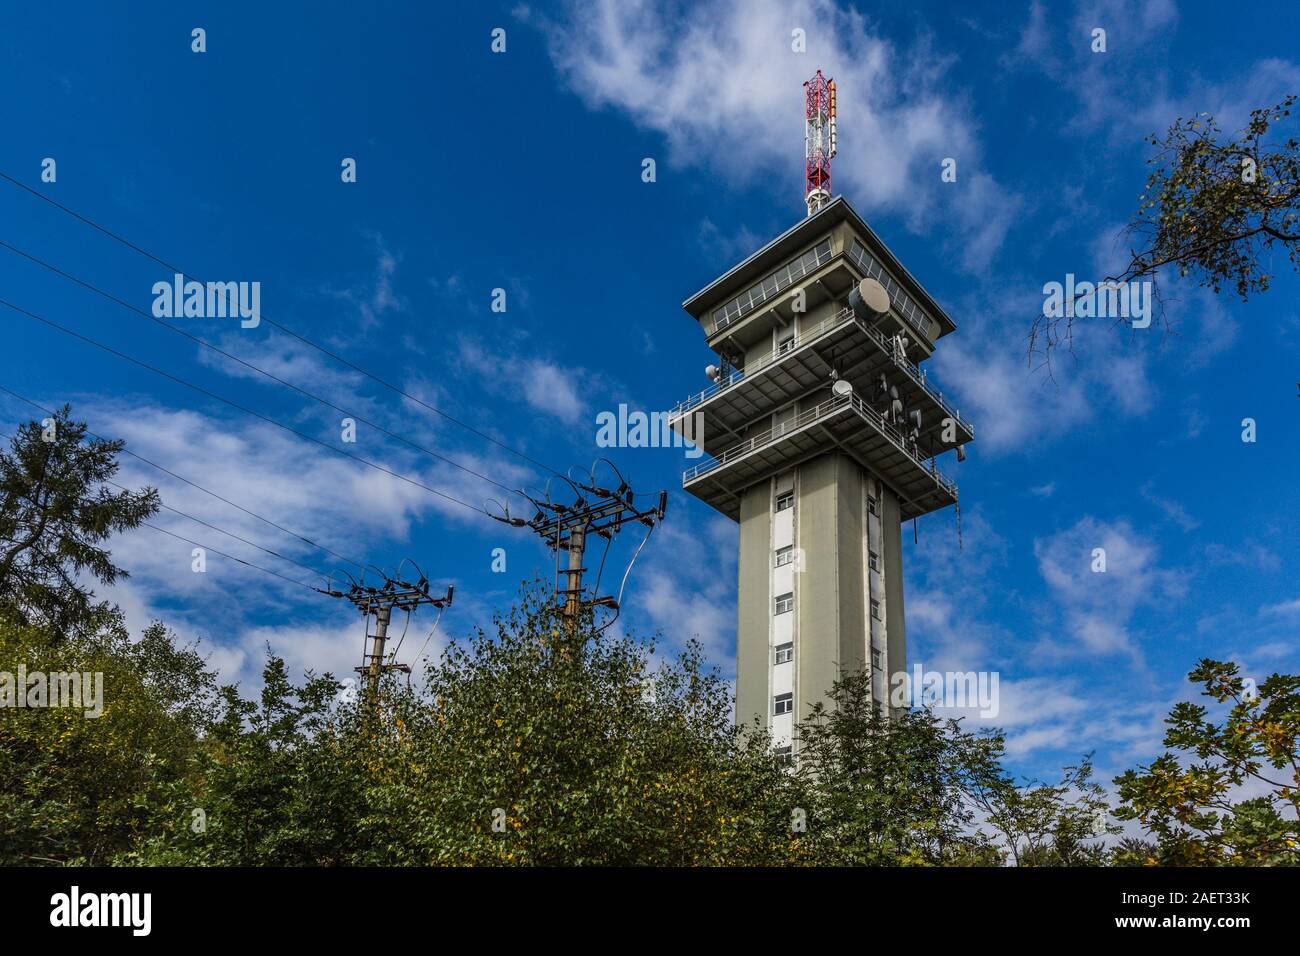 Zelena hora, Pelhrimov / Czech Republic - September 13 2019: Television communication tower, a tall grey building. Sunny day, blue sky and clouds. Stock Photo